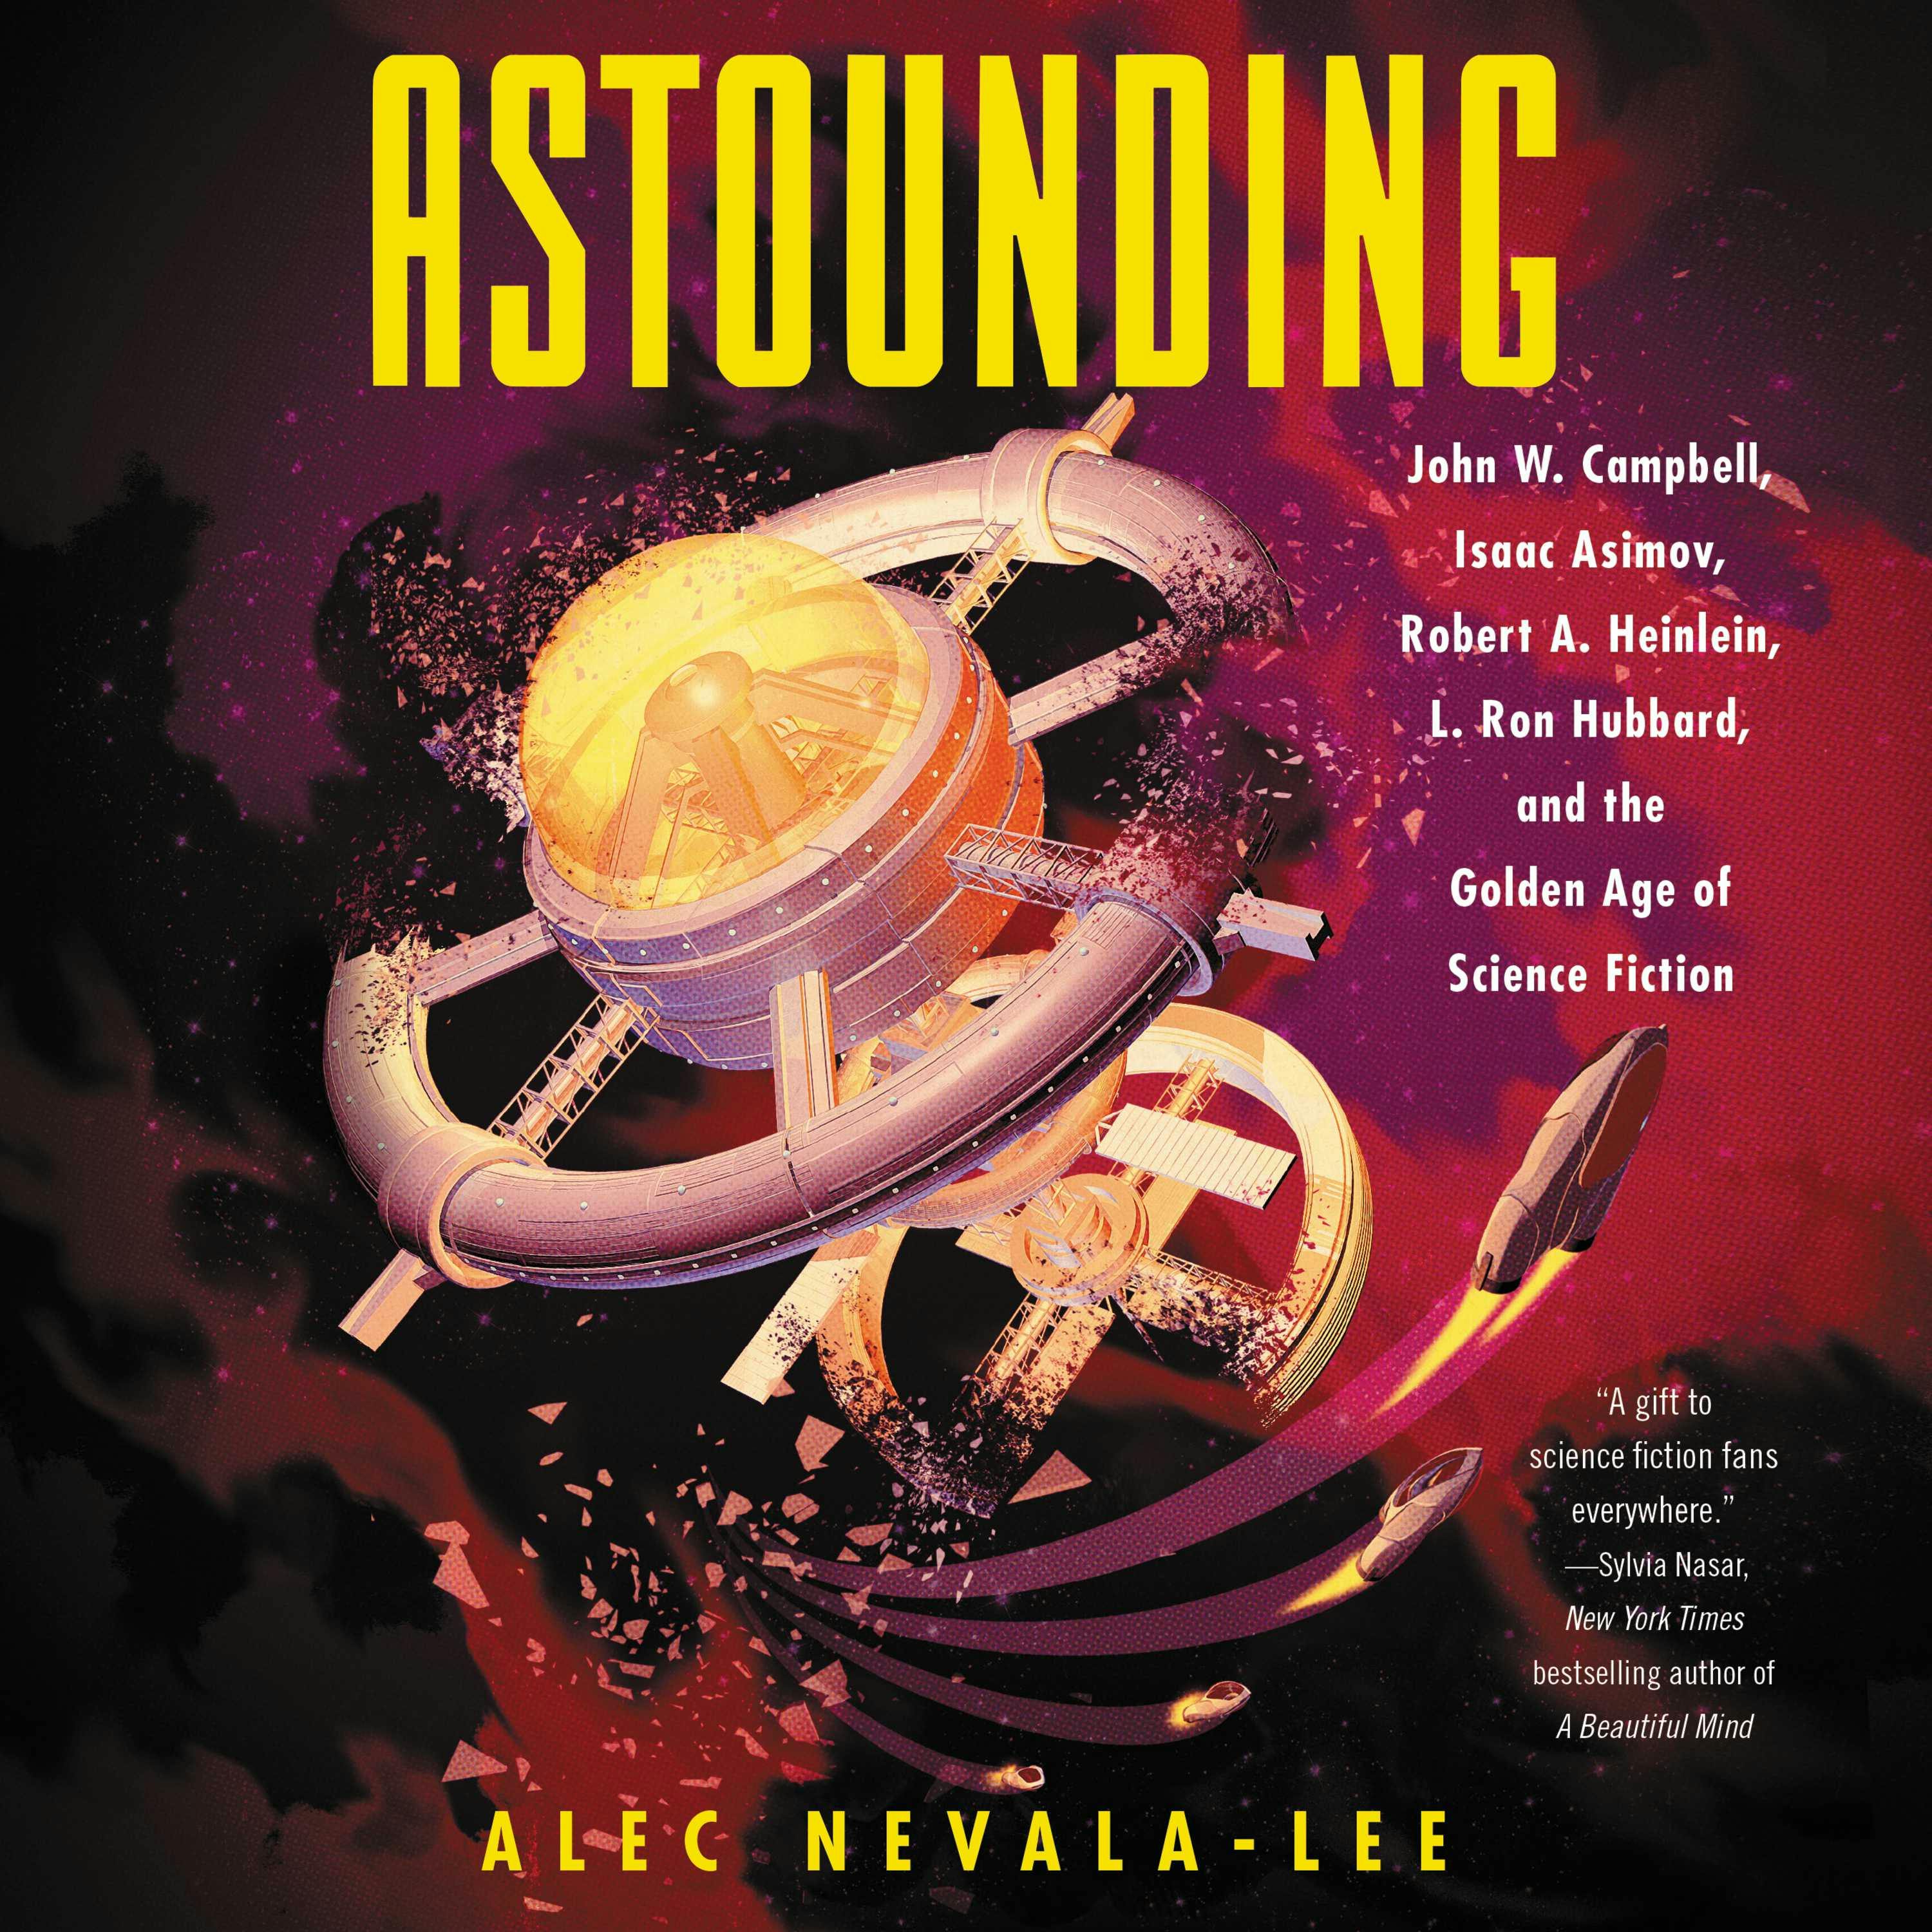 Astounding: John W. Campbell, Isaac Asimov, Robert A. Heinlen, L. Ron Hubbard, and the Golden Age of Science Fiction - Alec Nevala-Lee